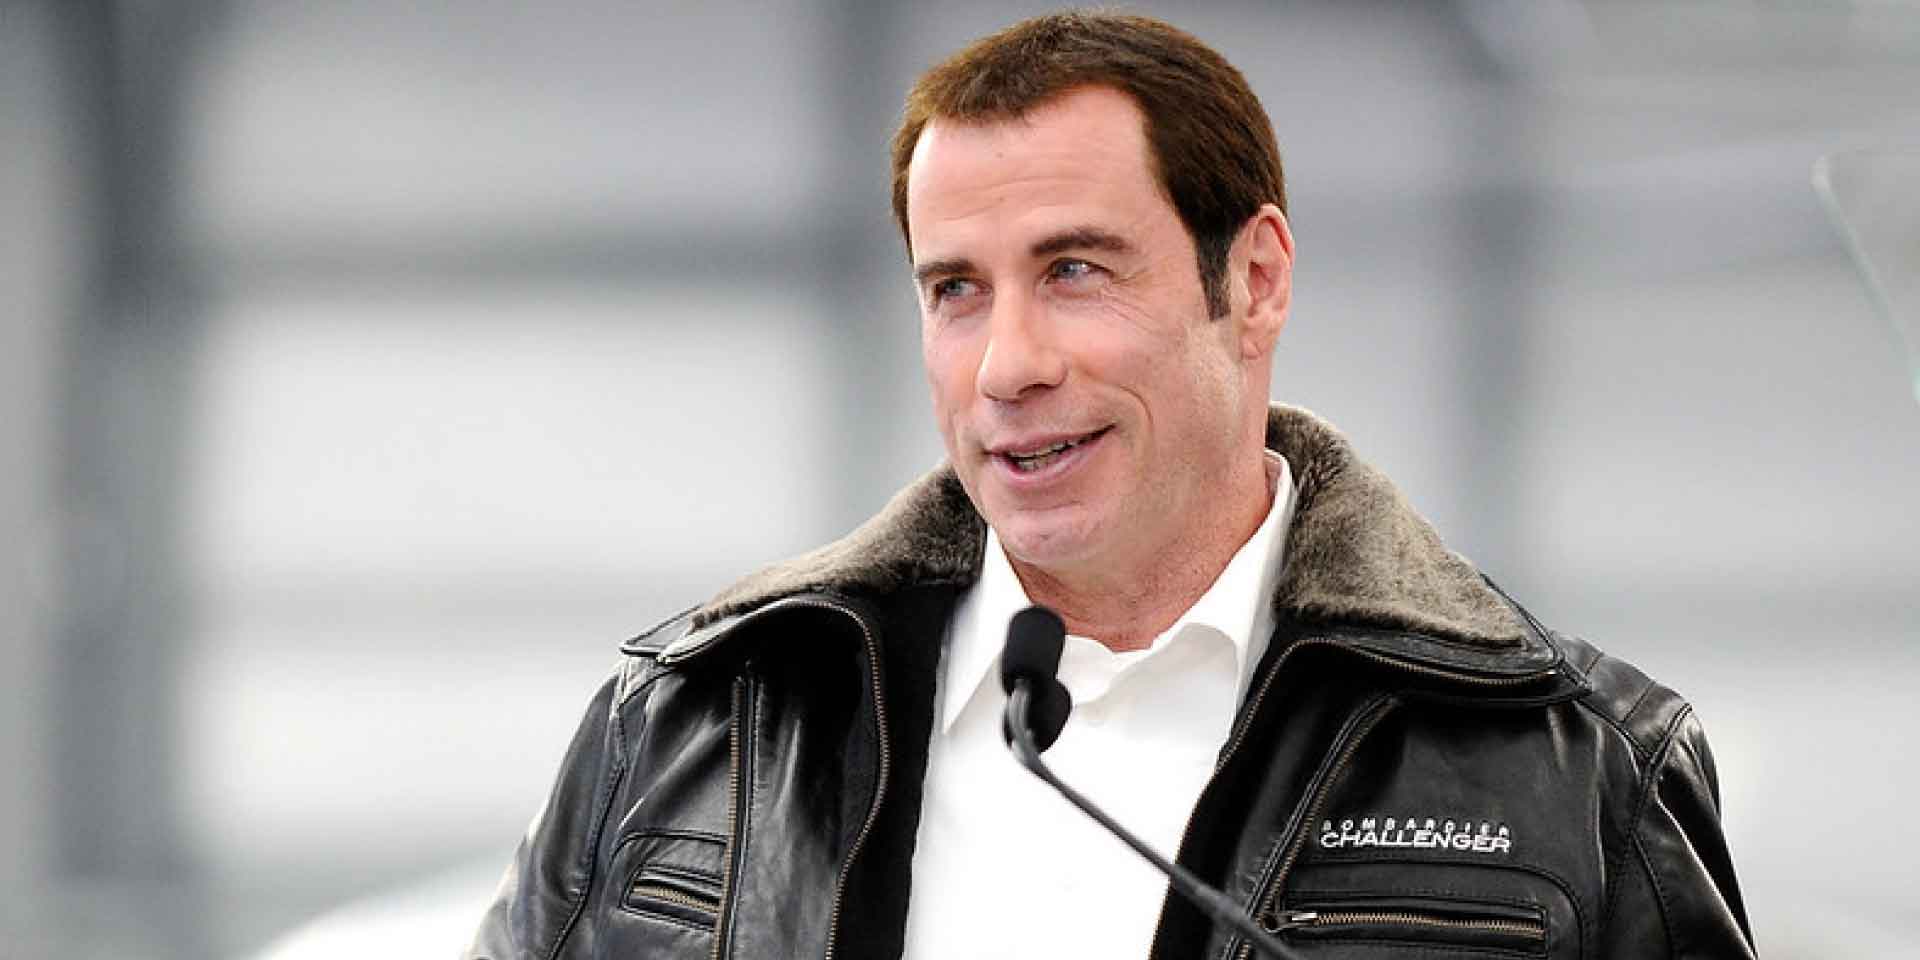 How do we know that John Travolta has been using hair systems?